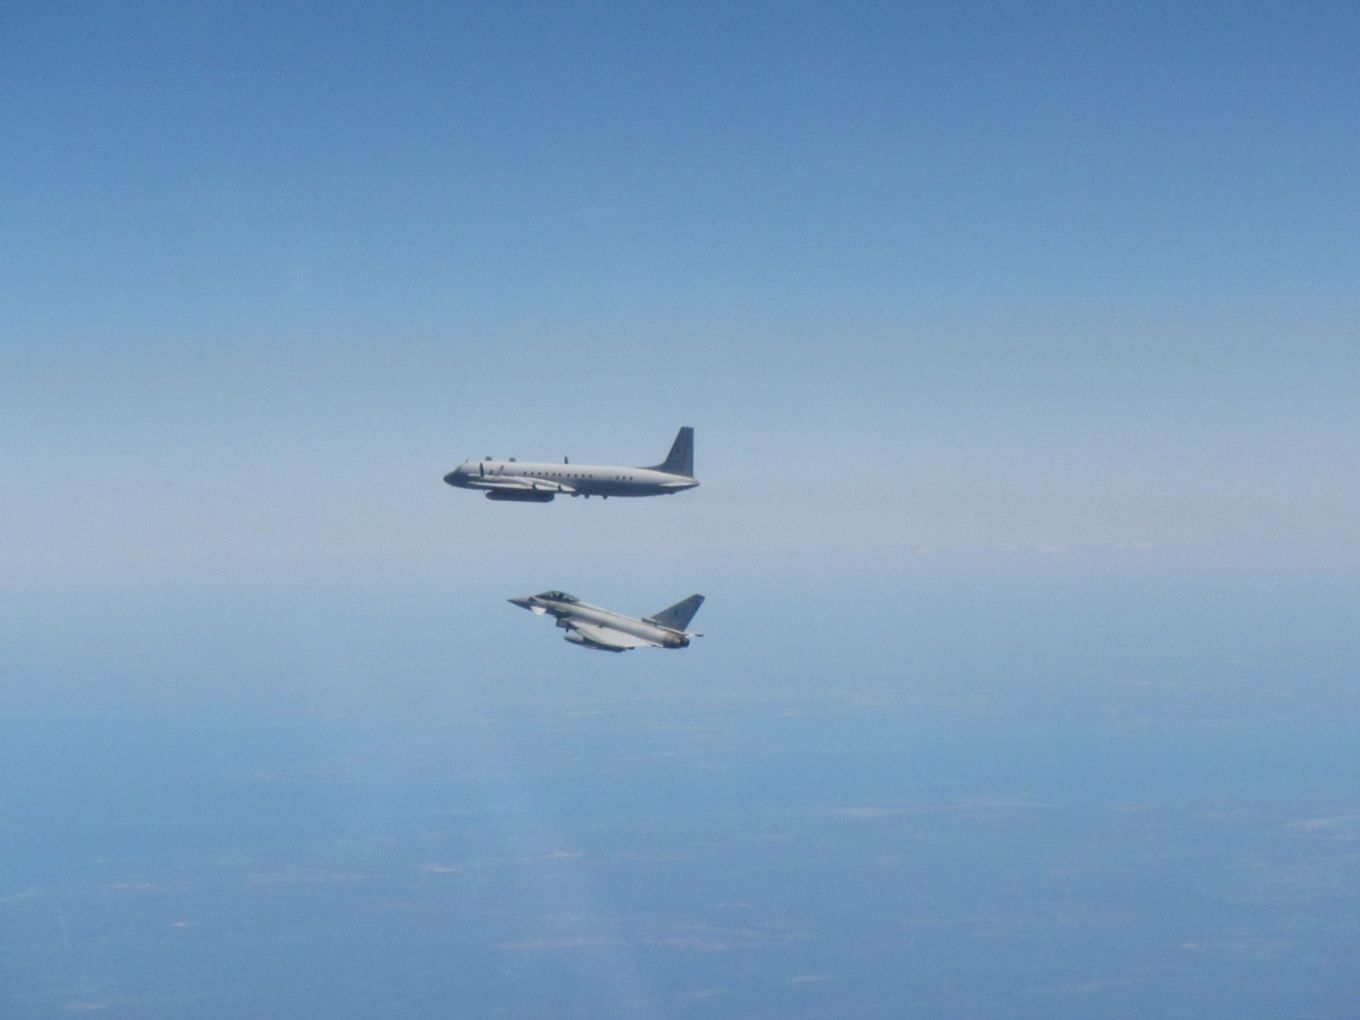 RAF Typhoons Scrambled In Lithuania To Intercept Russian IL-20 COOT ISR Aircraft